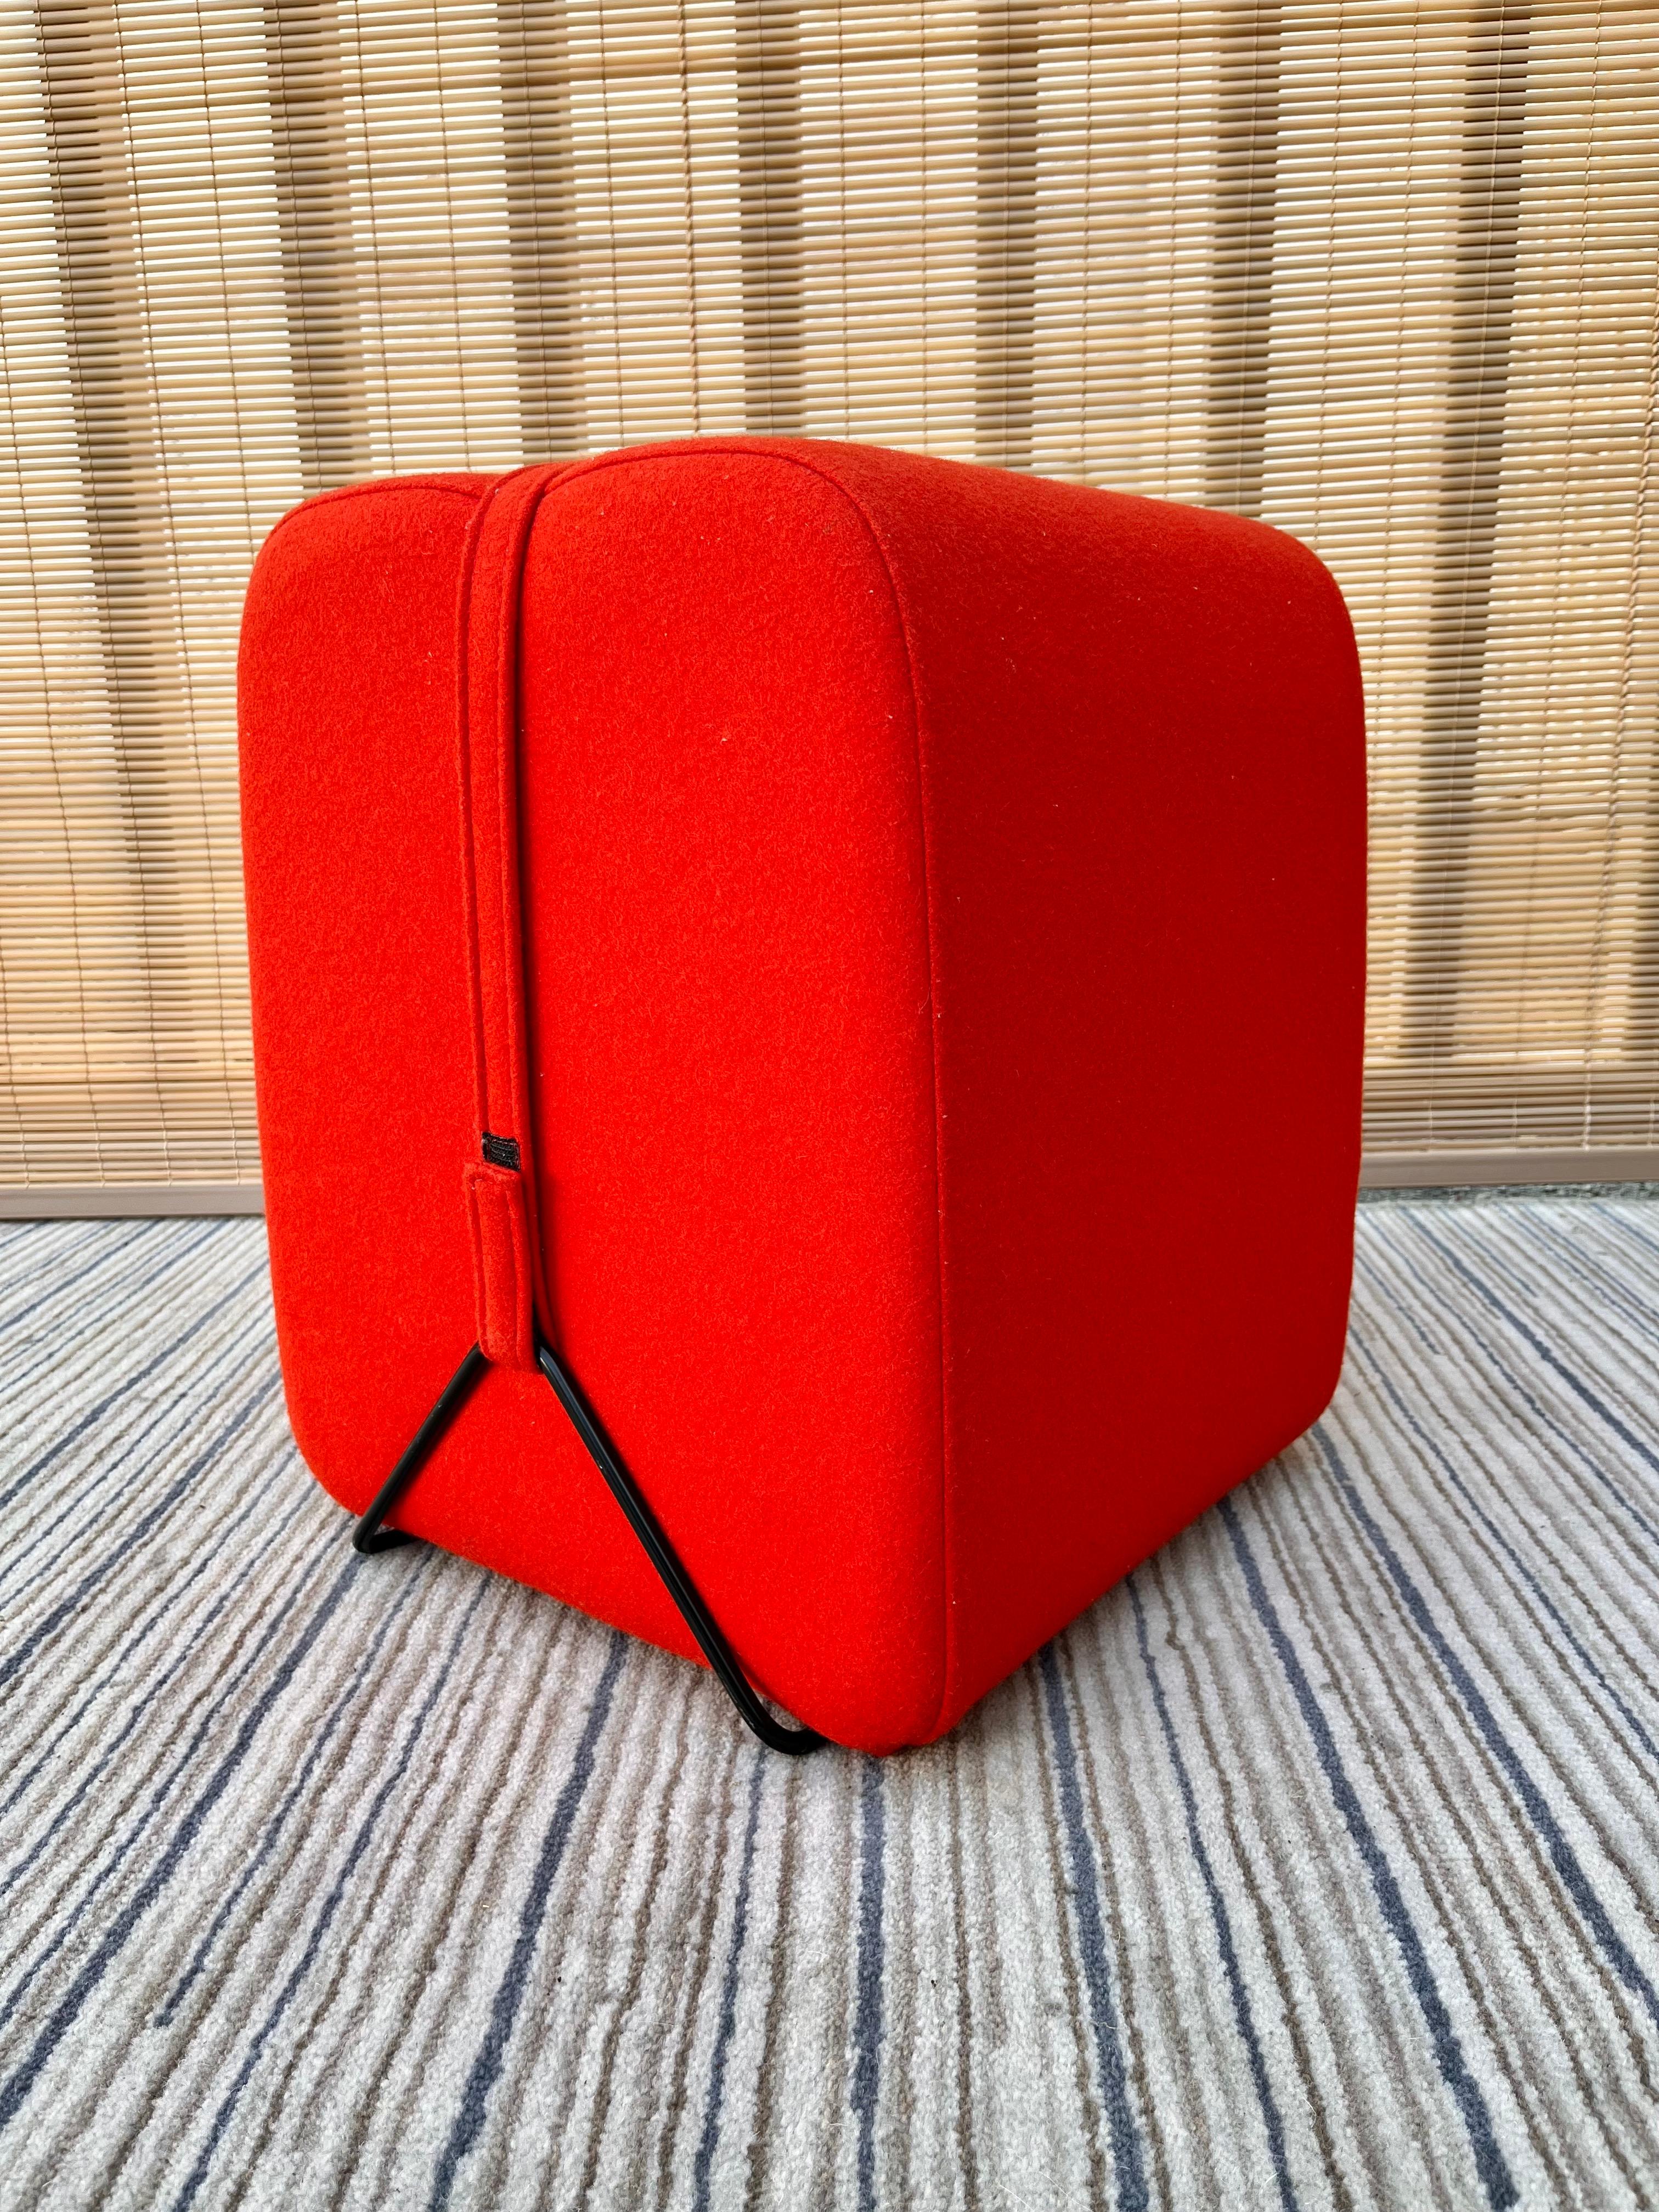 Metal Contemporary Mobidec Footstool by Pierre Charpin for Ligne Roset